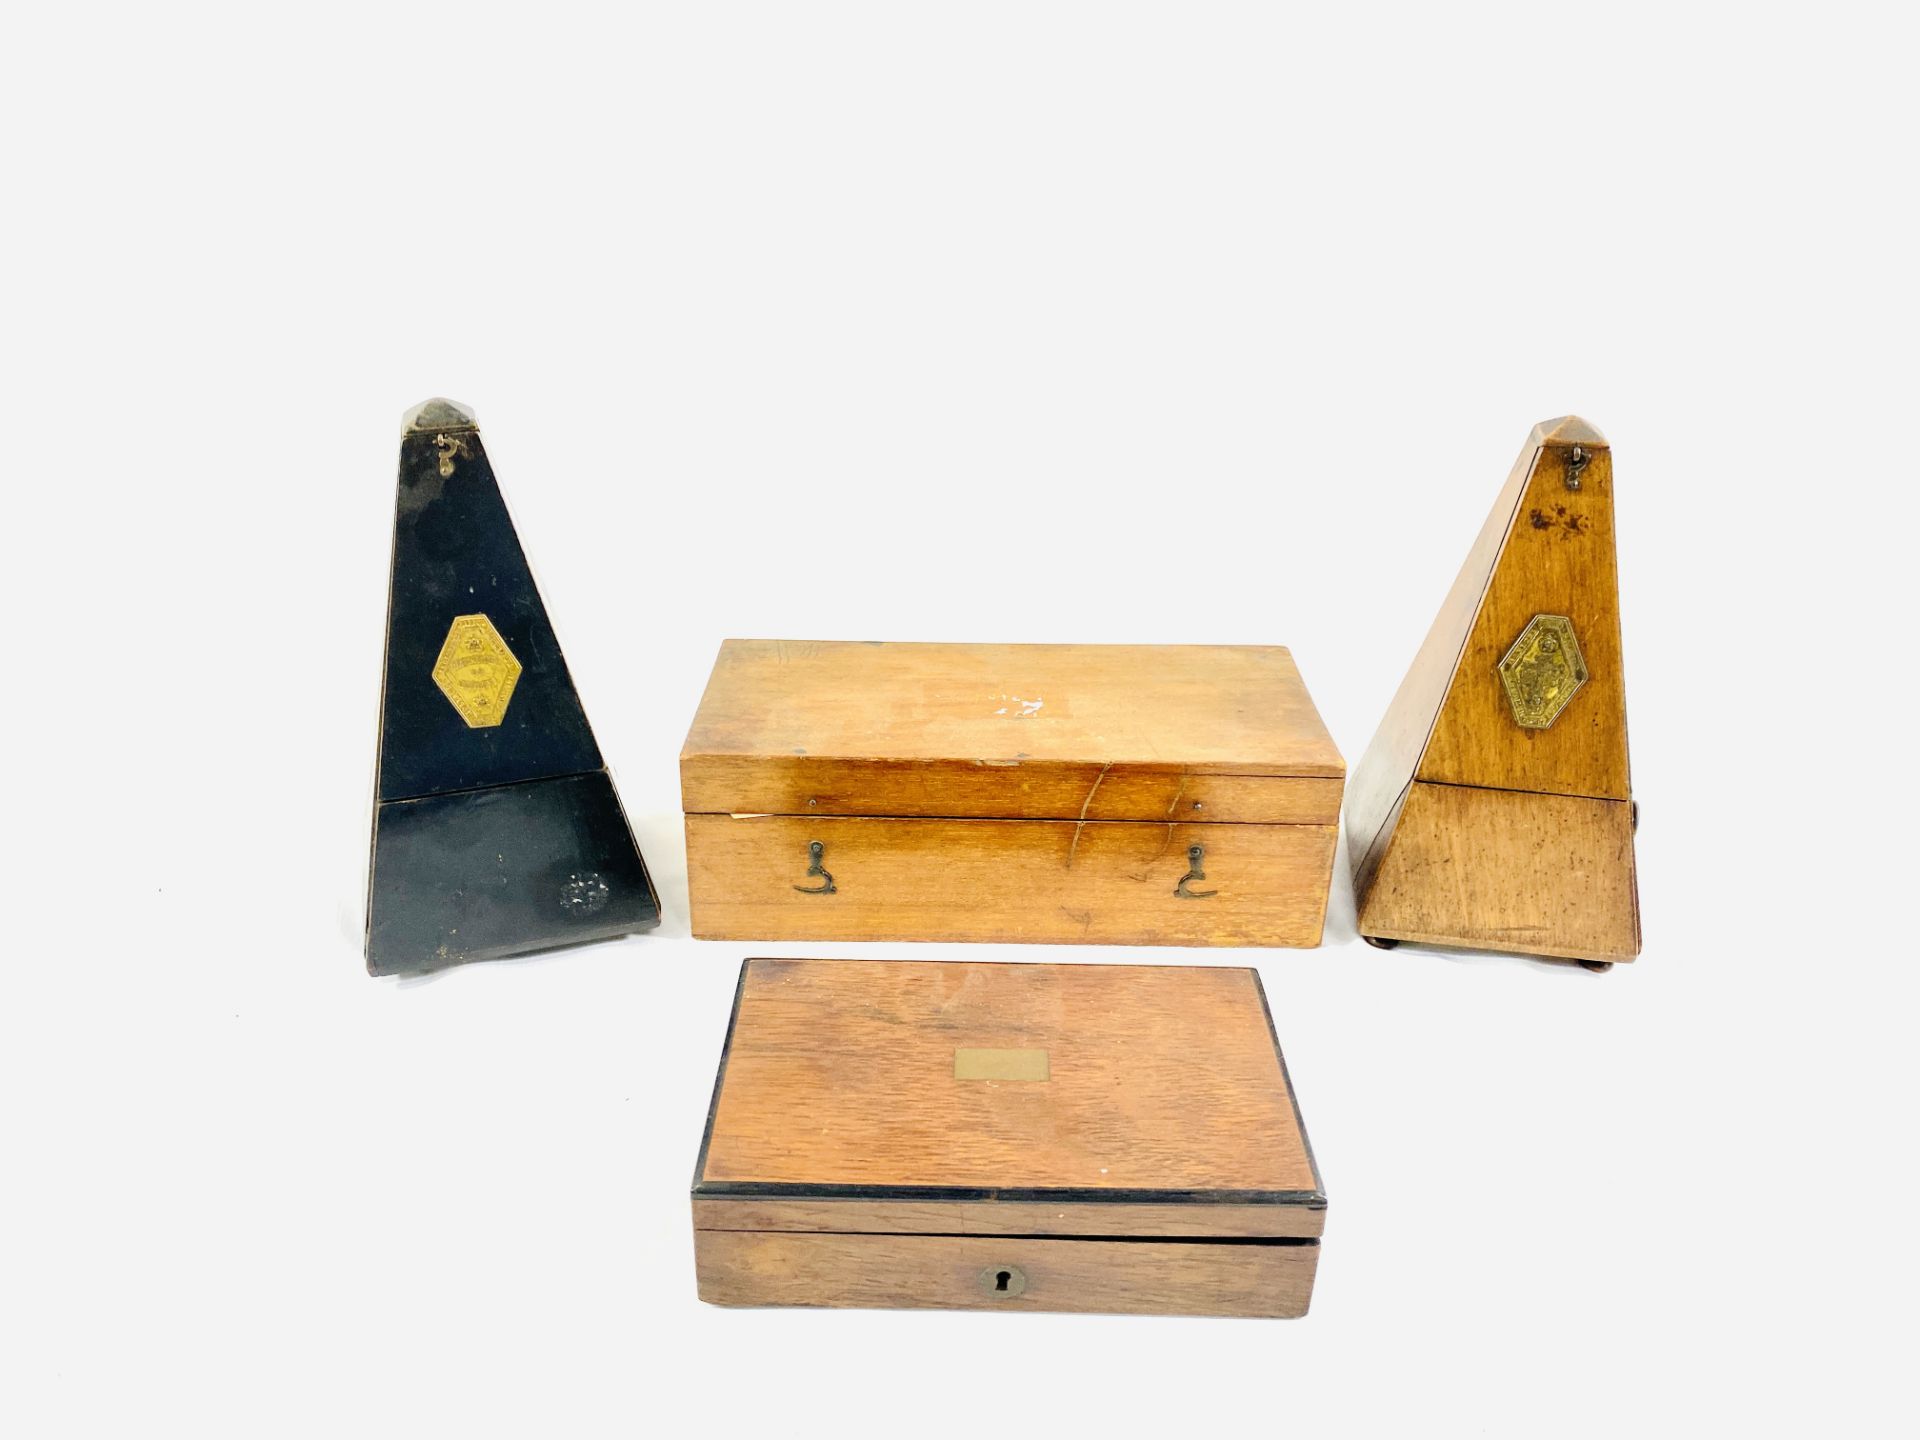 Two metronomes, a microscope and a box of drawing instruments